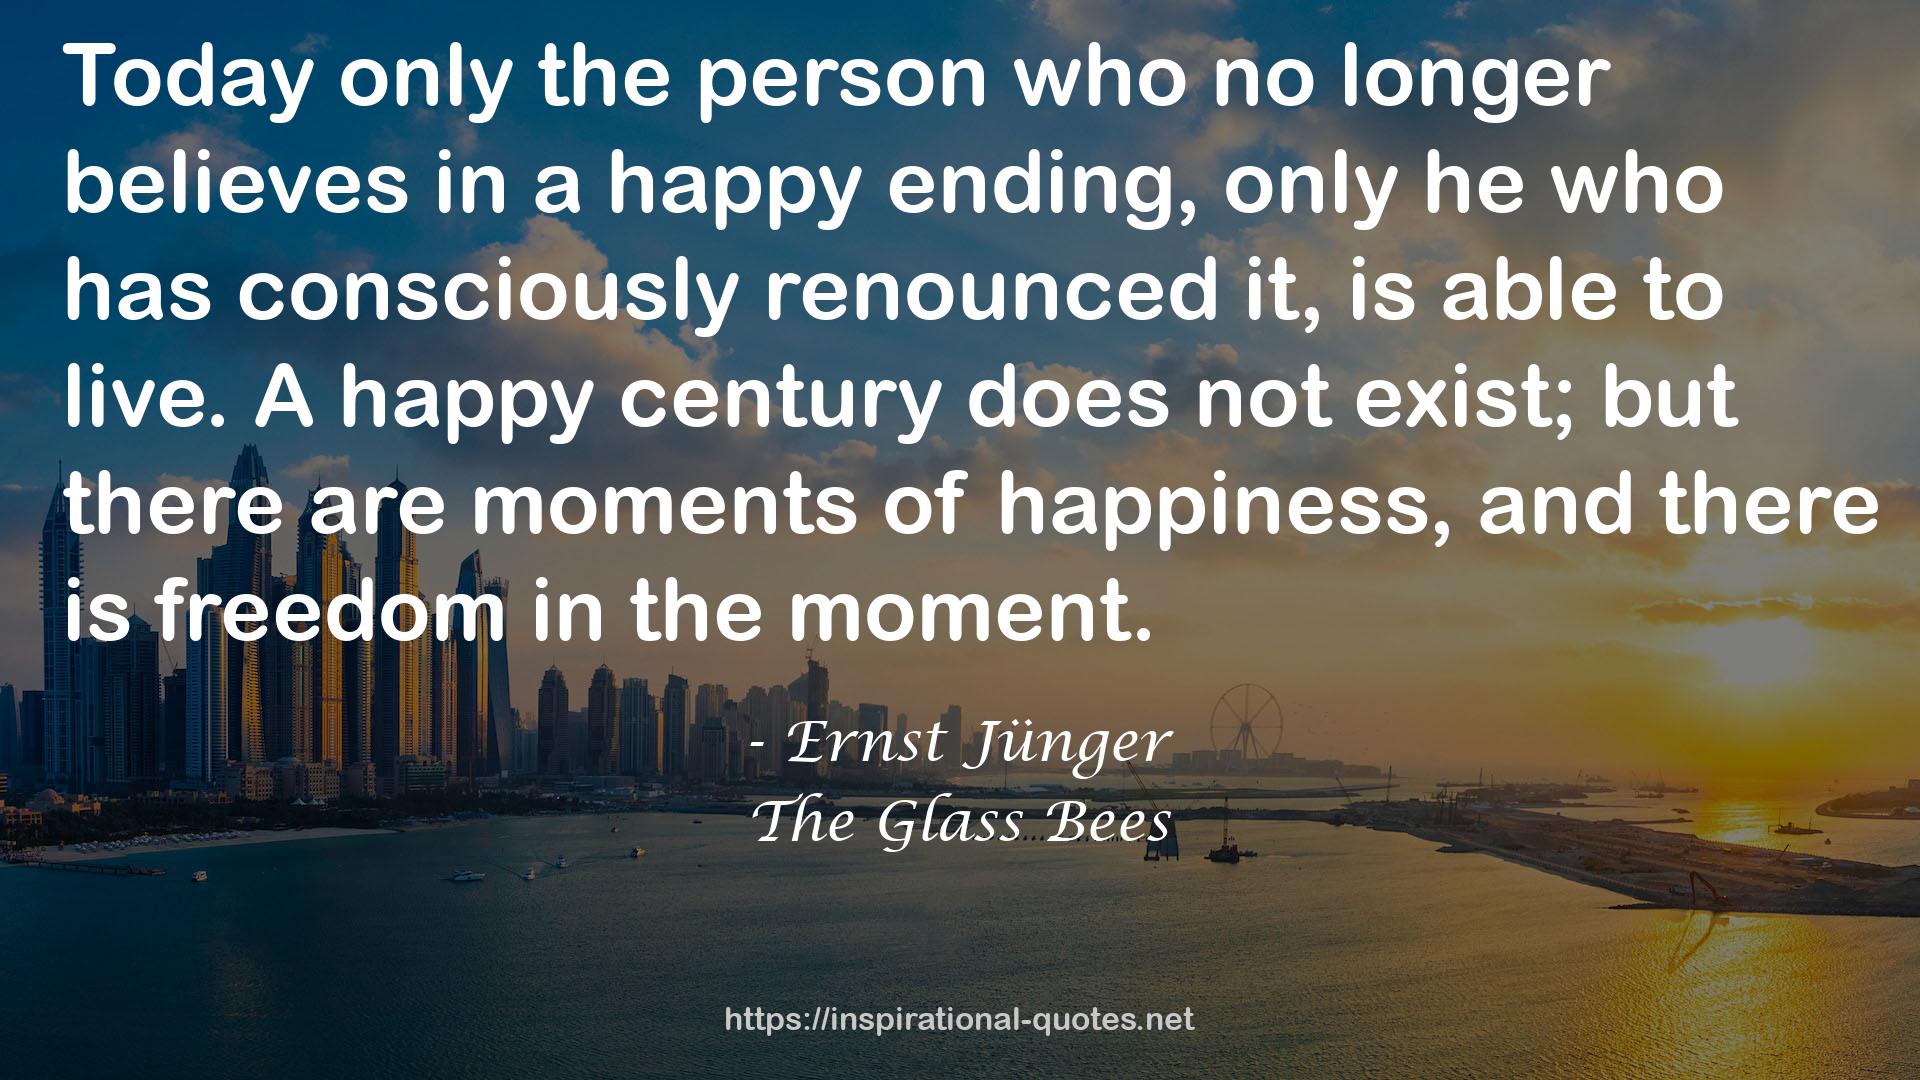 The Glass Bees QUOTES